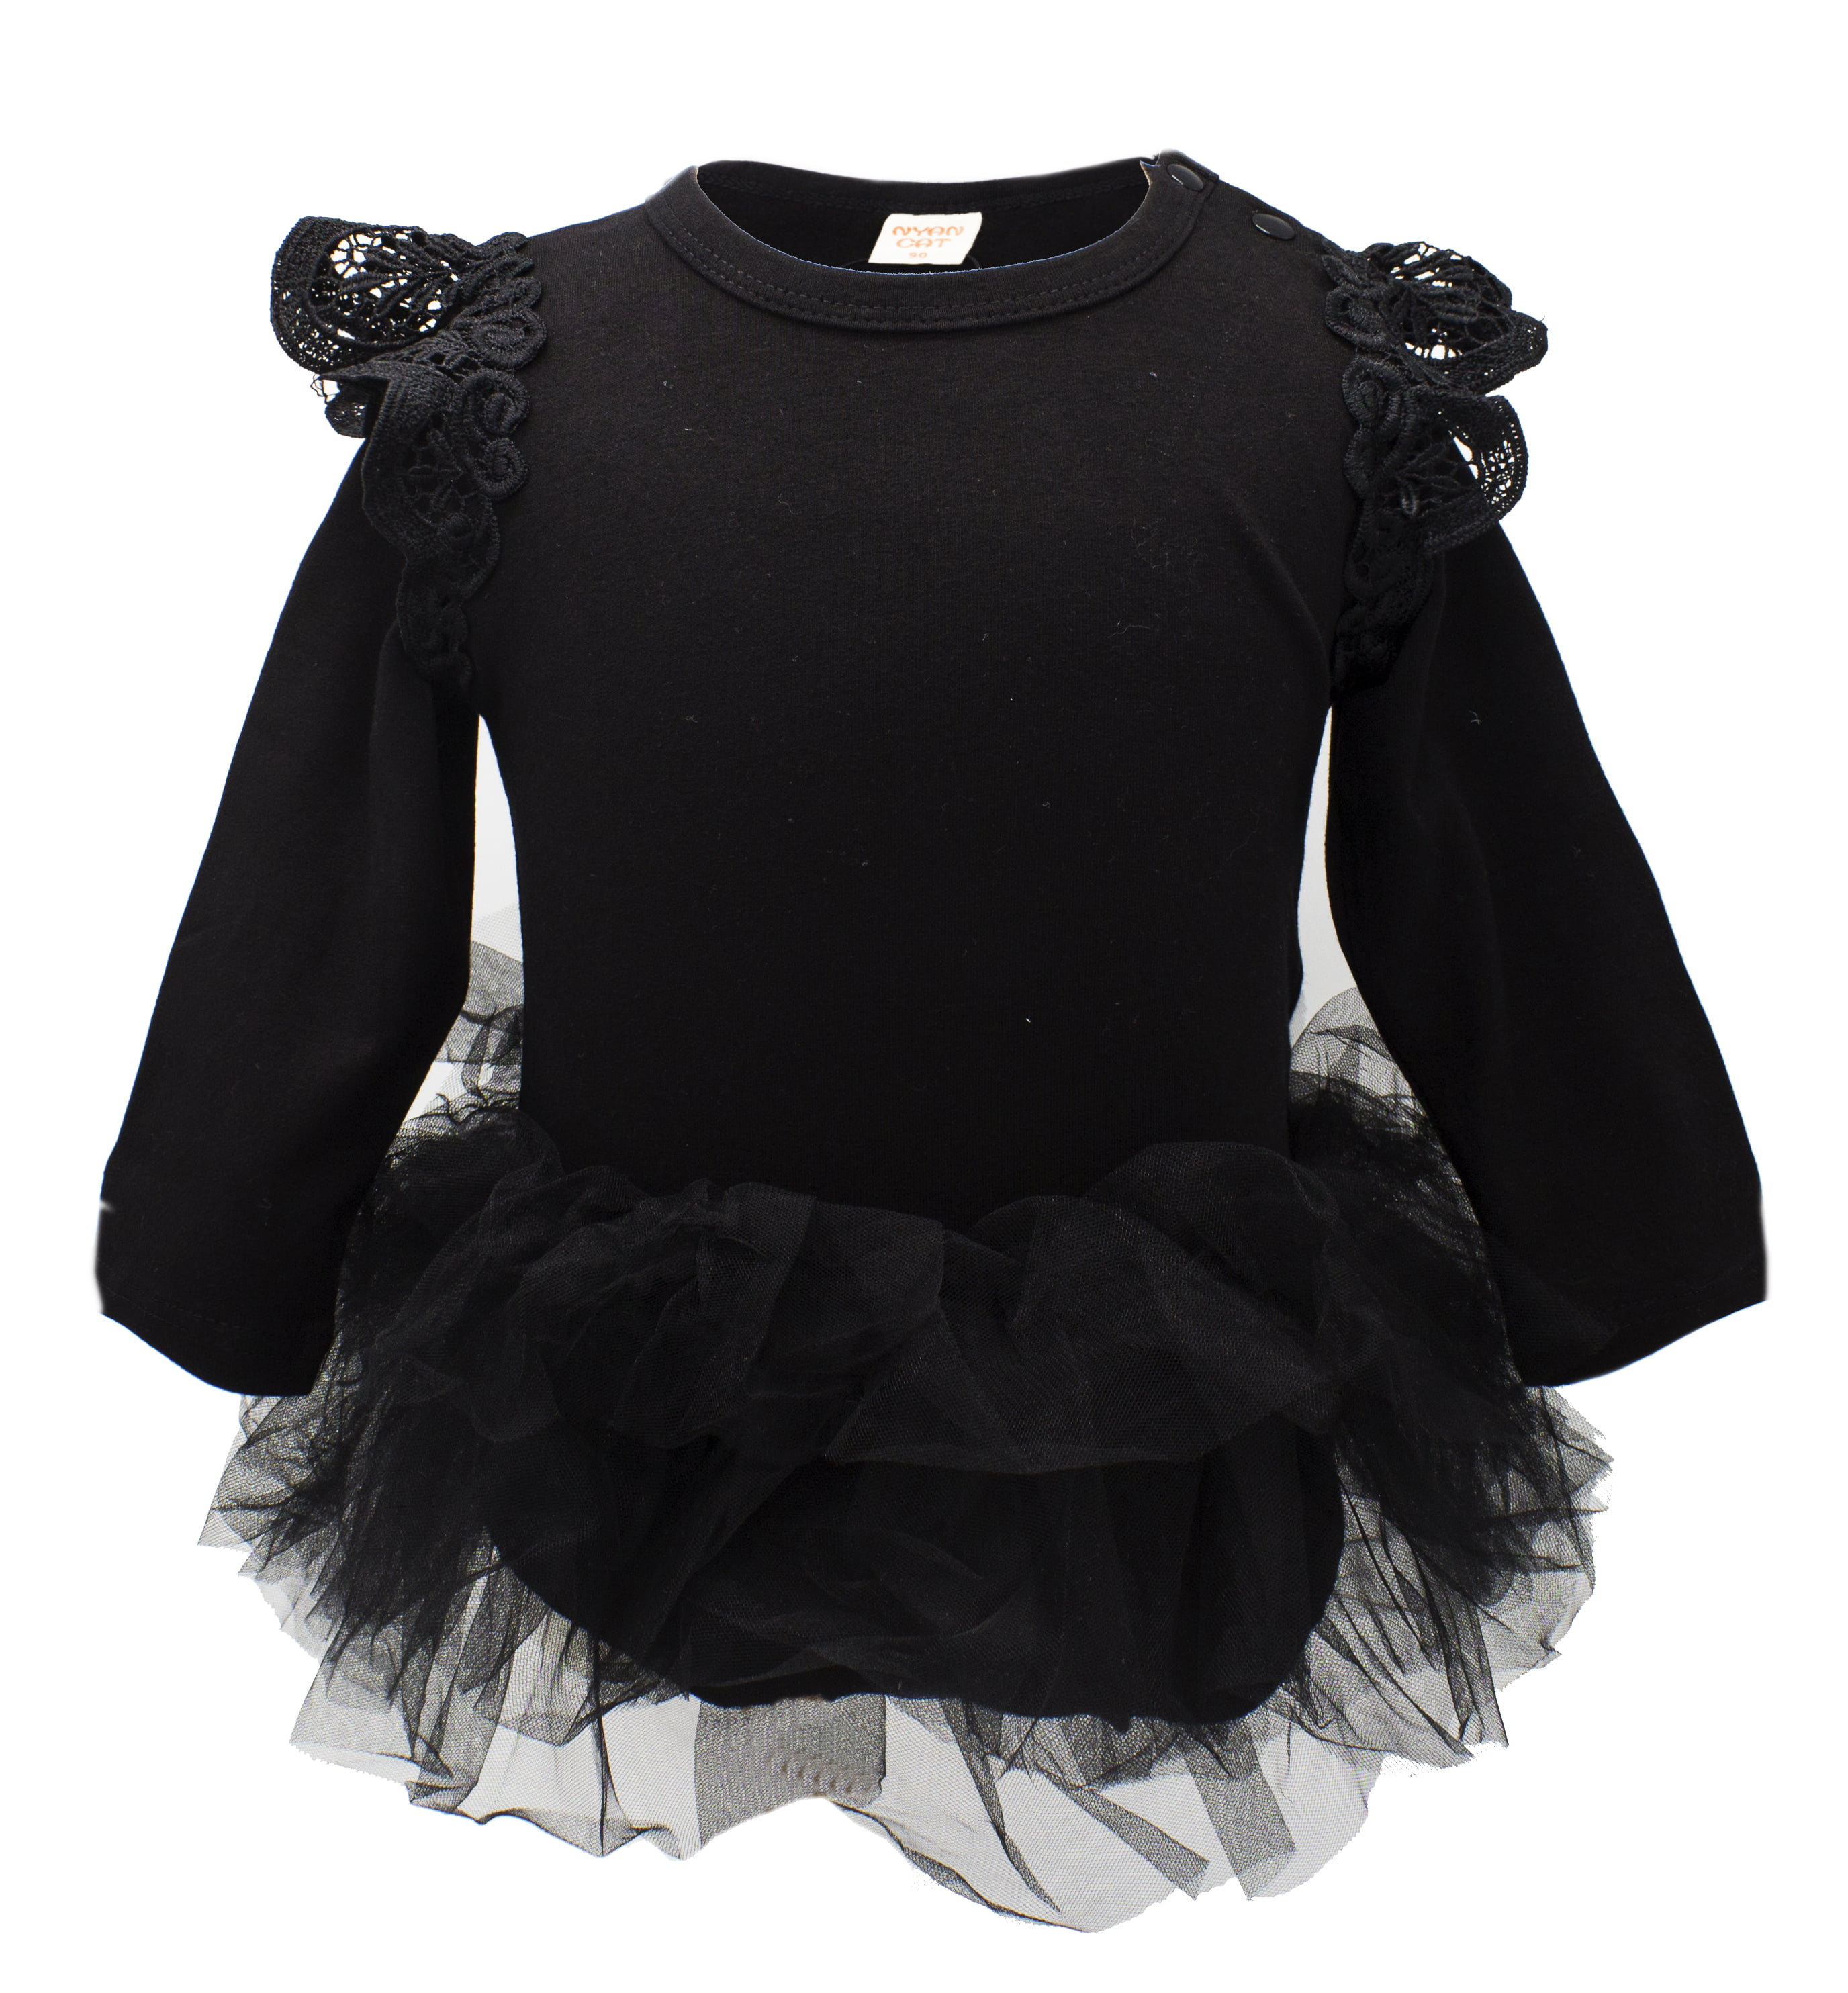 Details about   Rabbit Skins Cute Ruffle Edge T-shirts Choice of size and color soft 100%cotton 